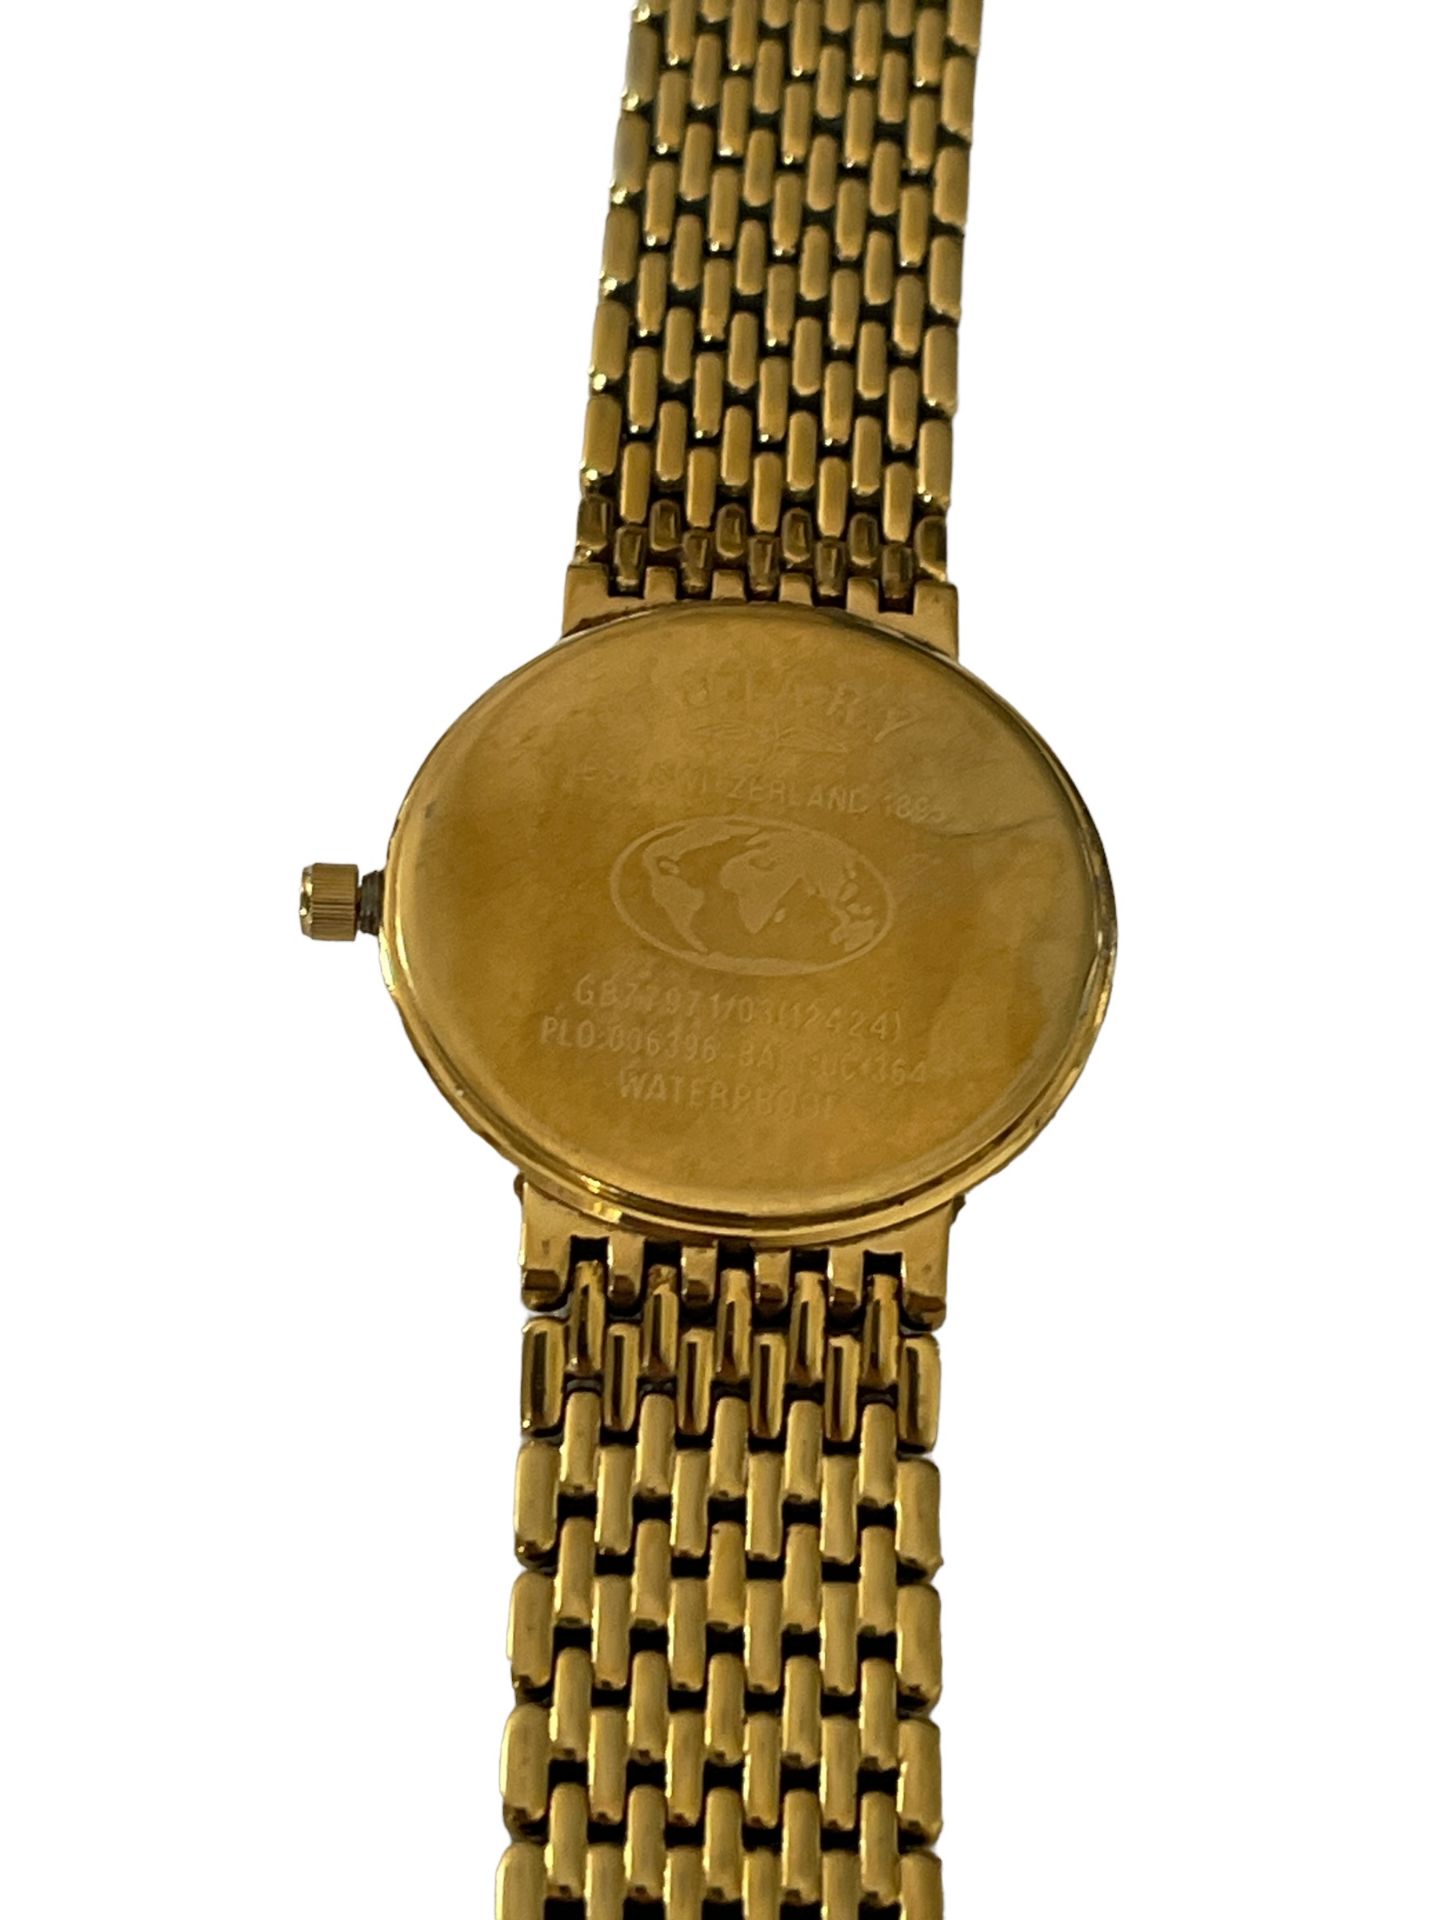 Rotary gents watch gold-plated - Image 4 of 4